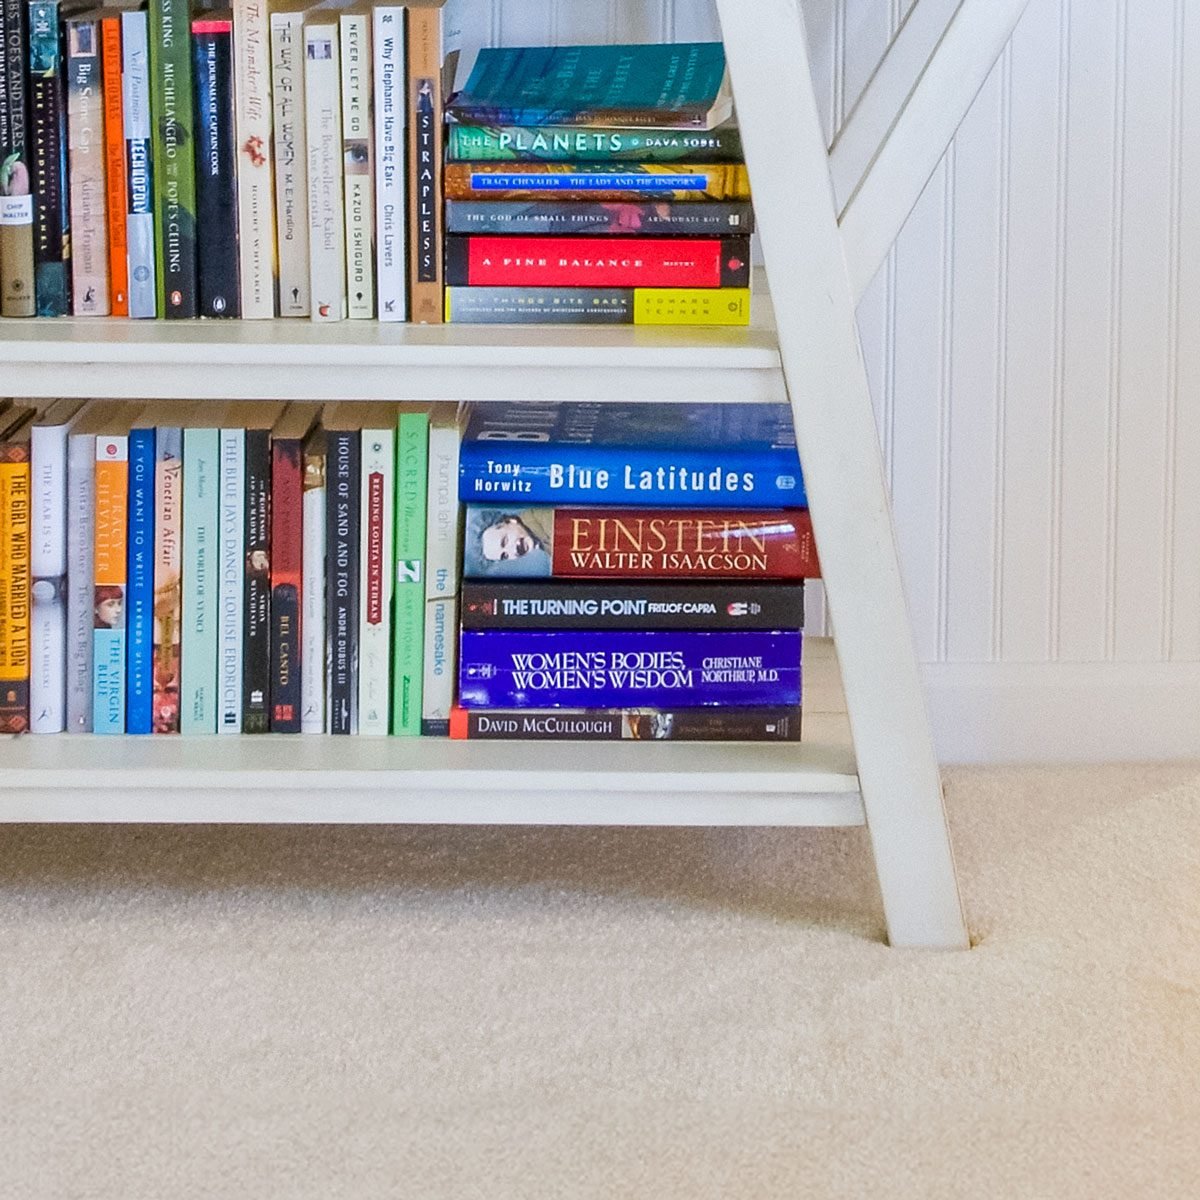 How To Fix Steady a Bookcase on Carpet [Video]